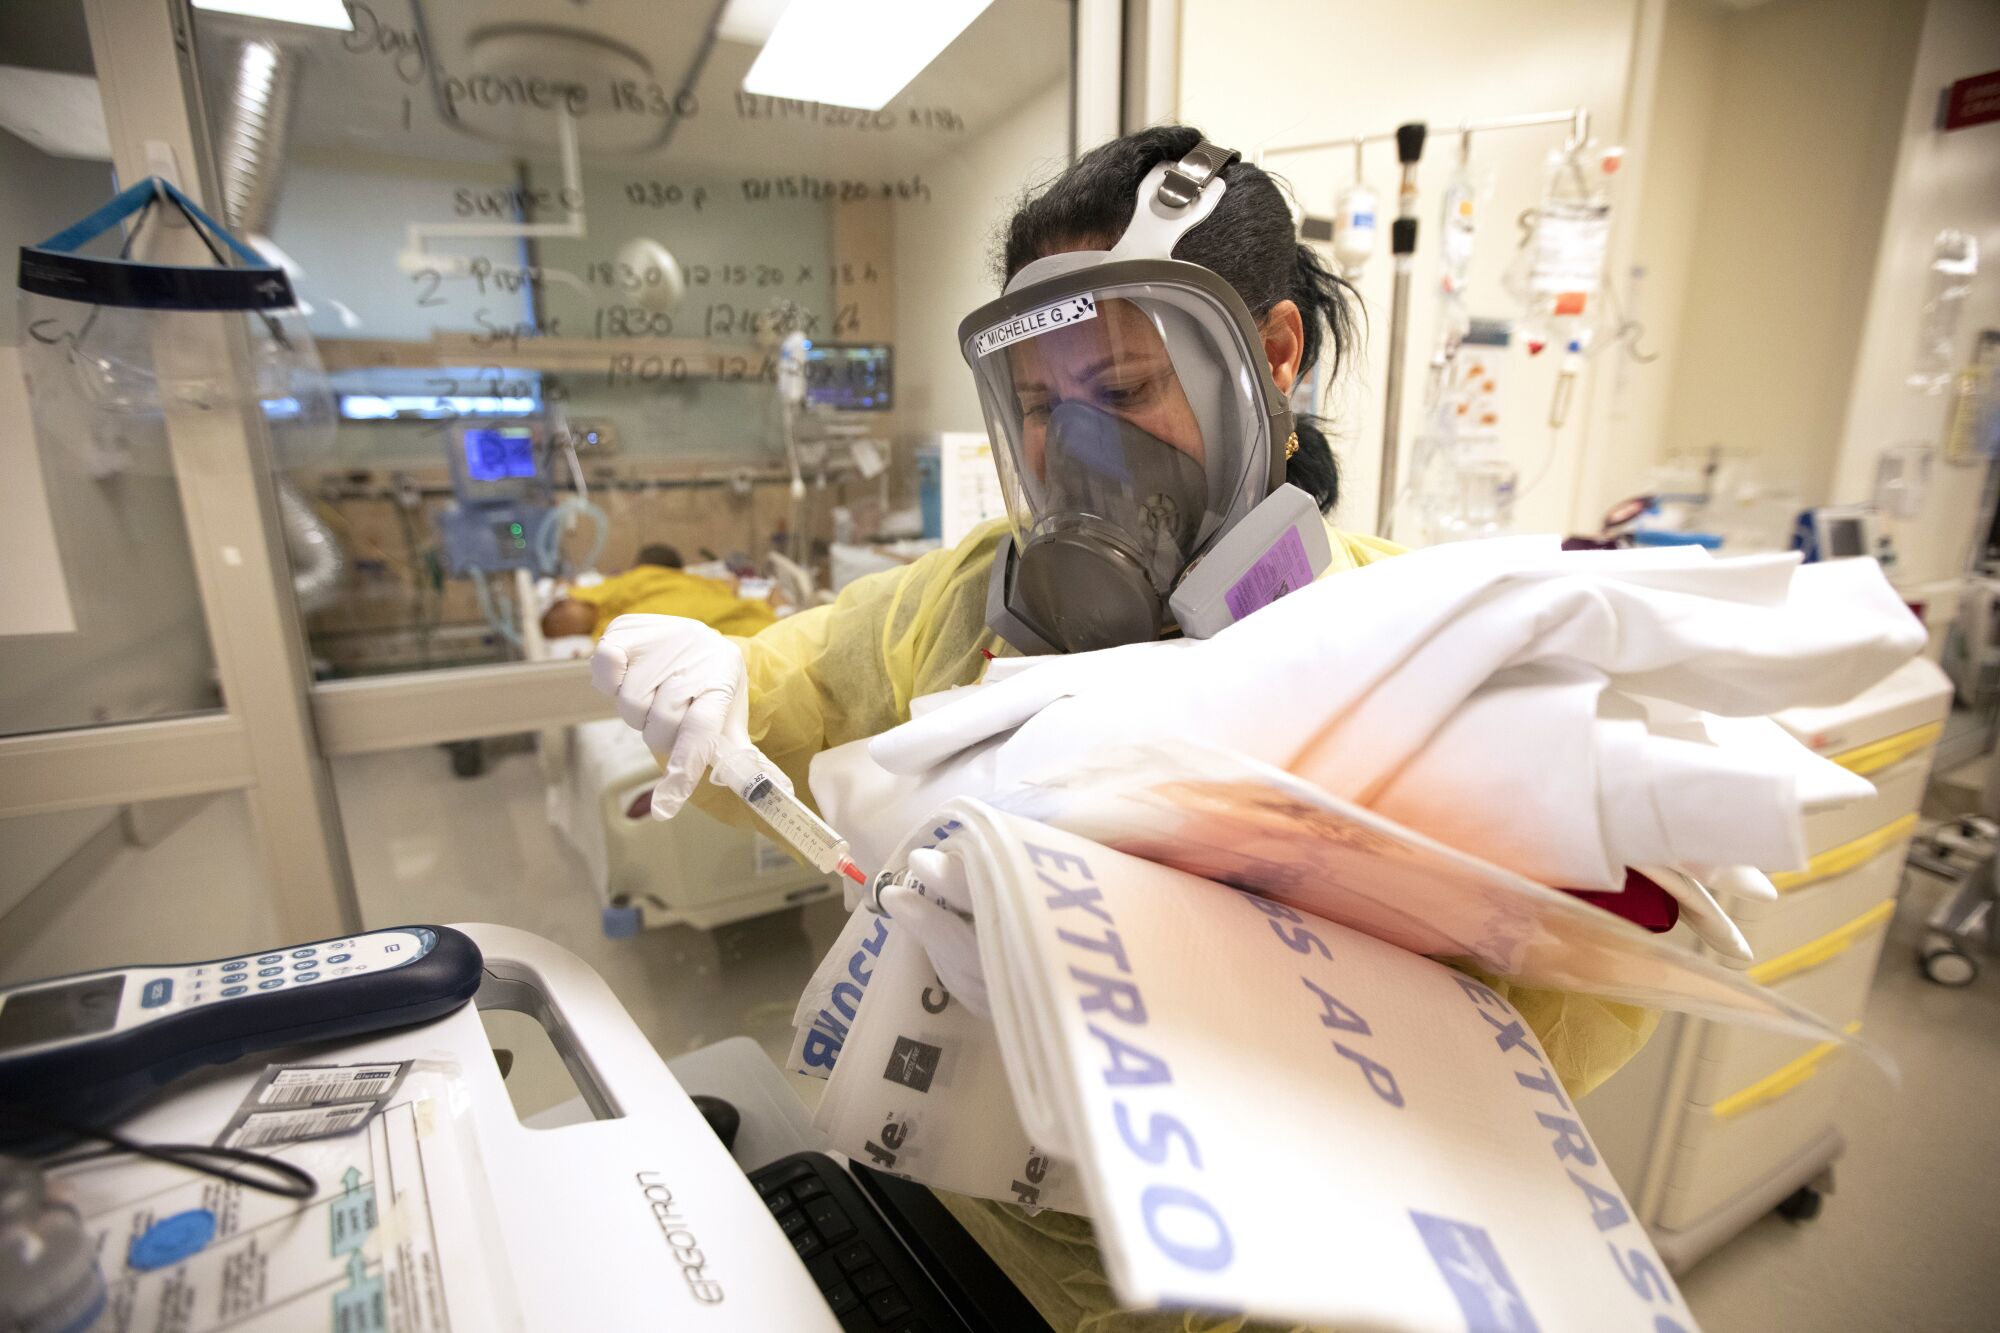 A nurse wearing a respirator mask stands with arms full of supplies.